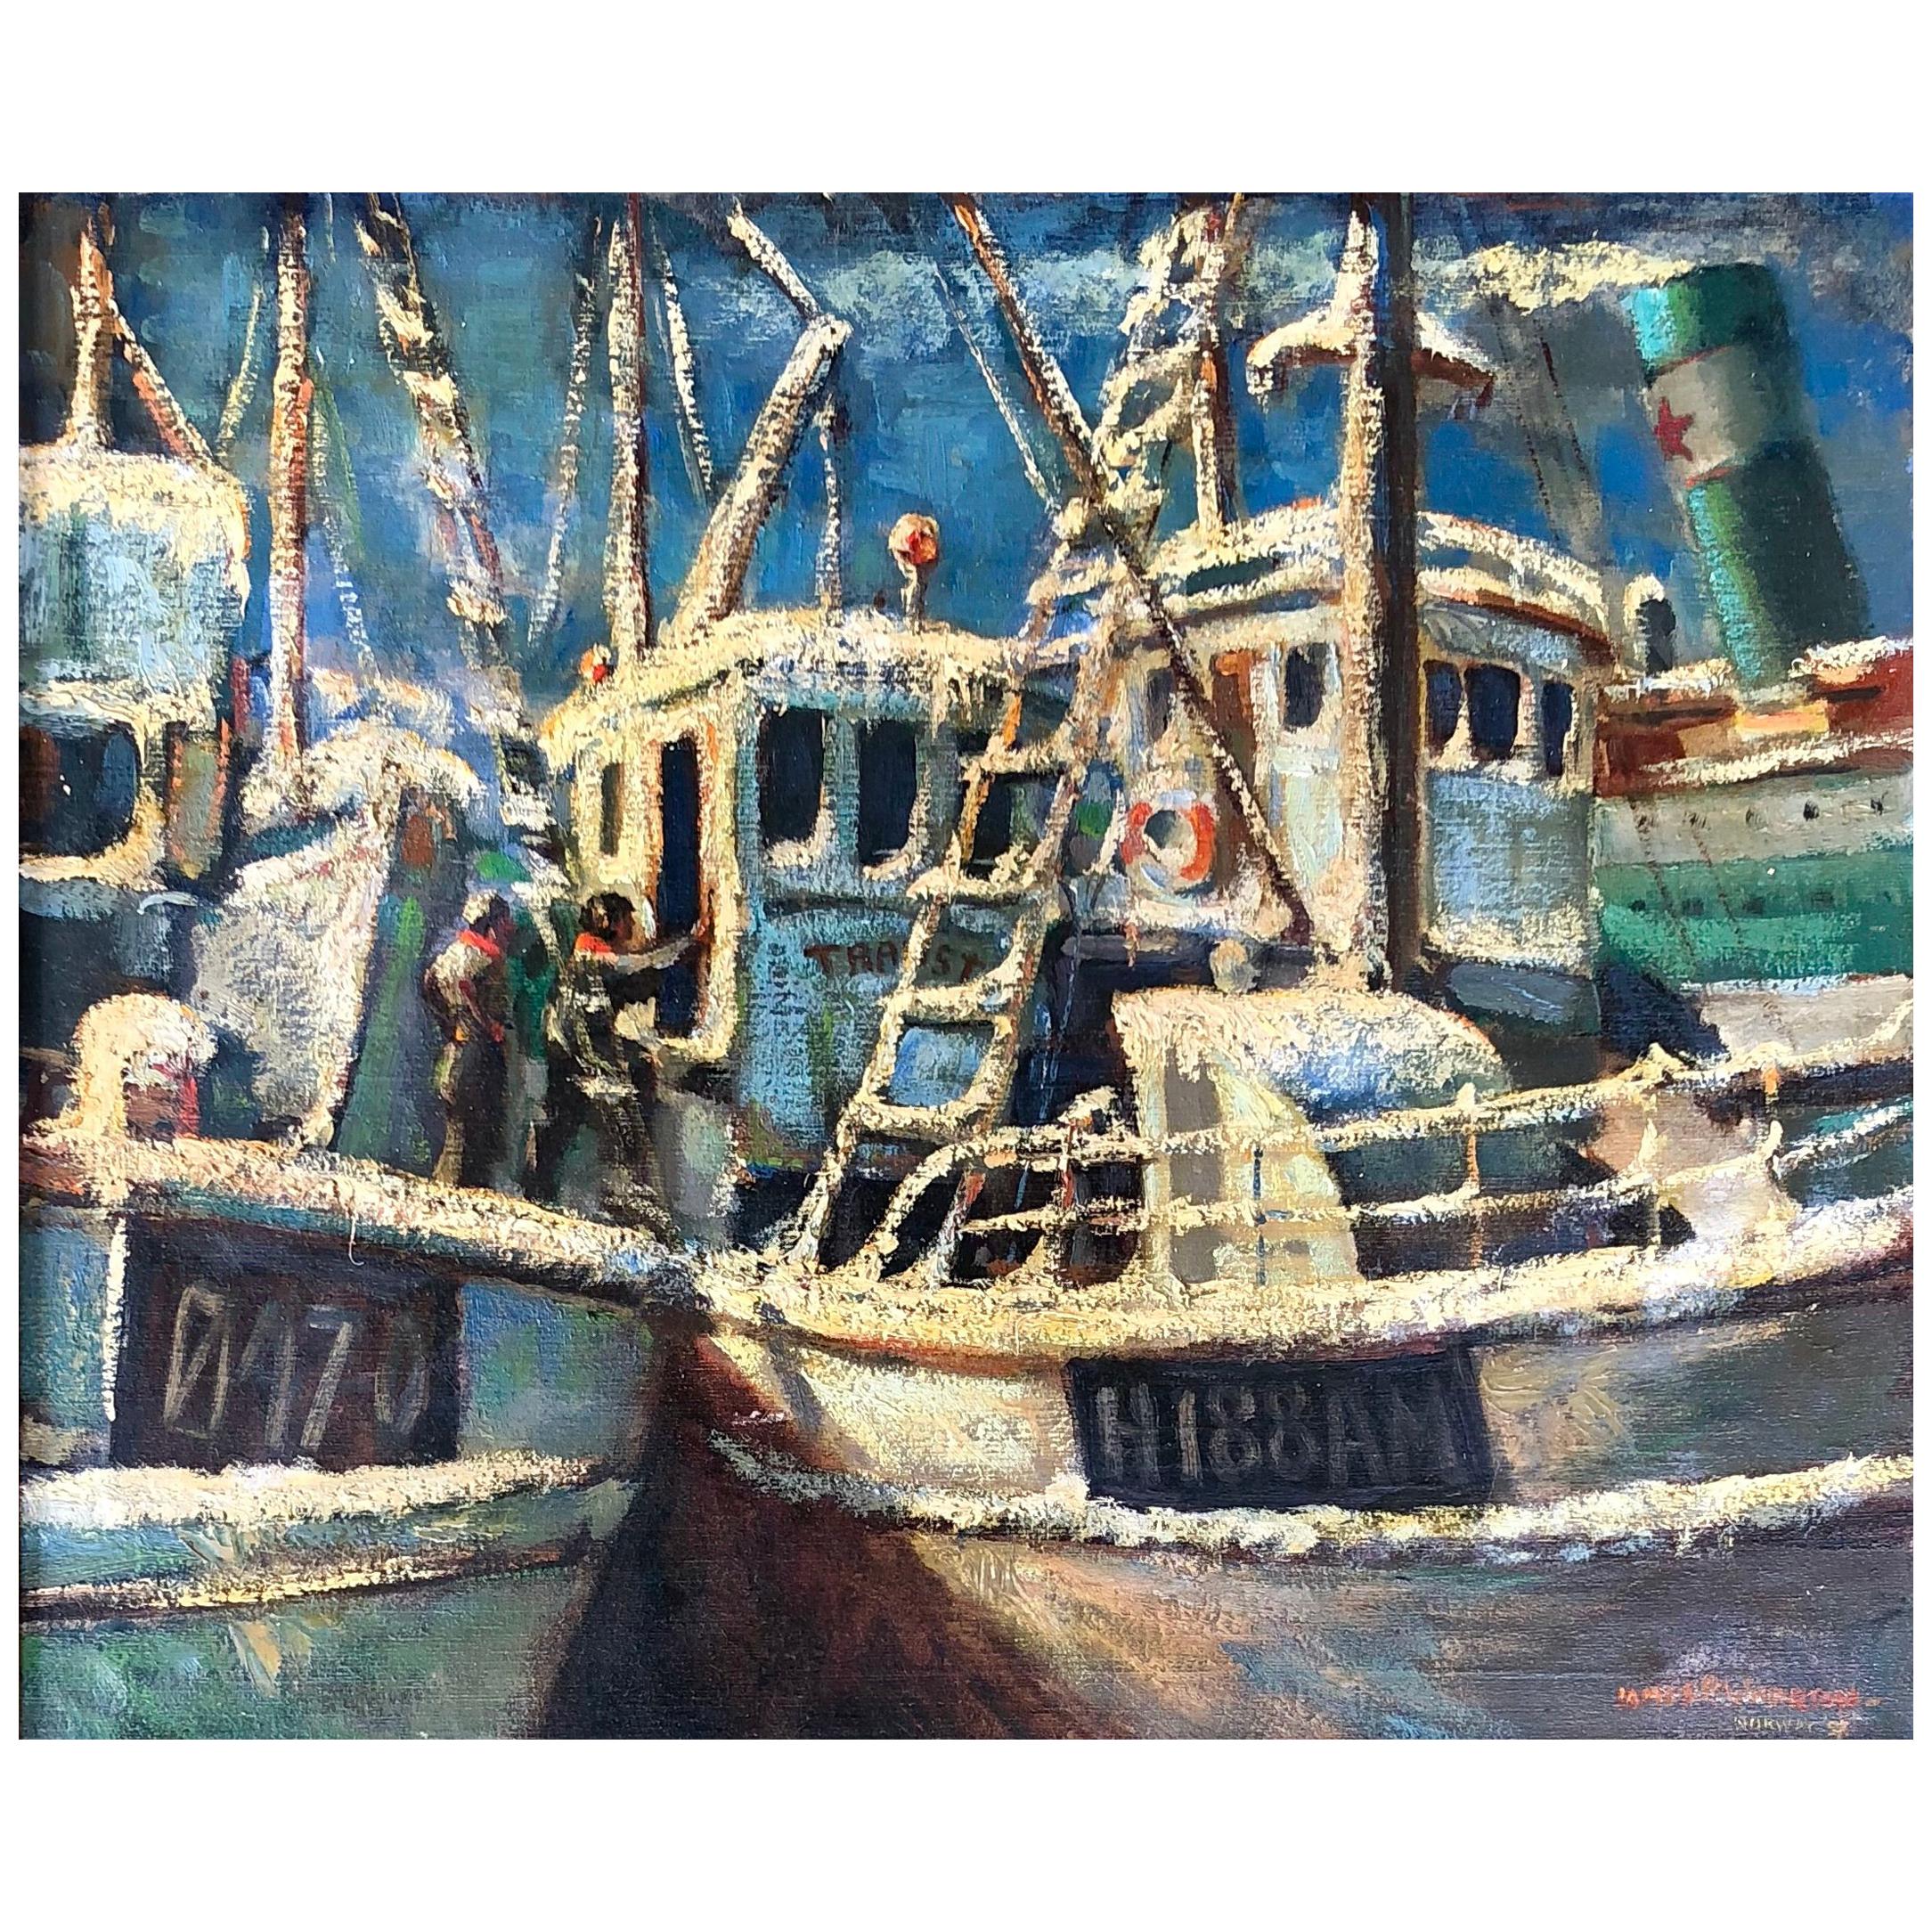 "Fishing Boats in Norway" by James P Wharton